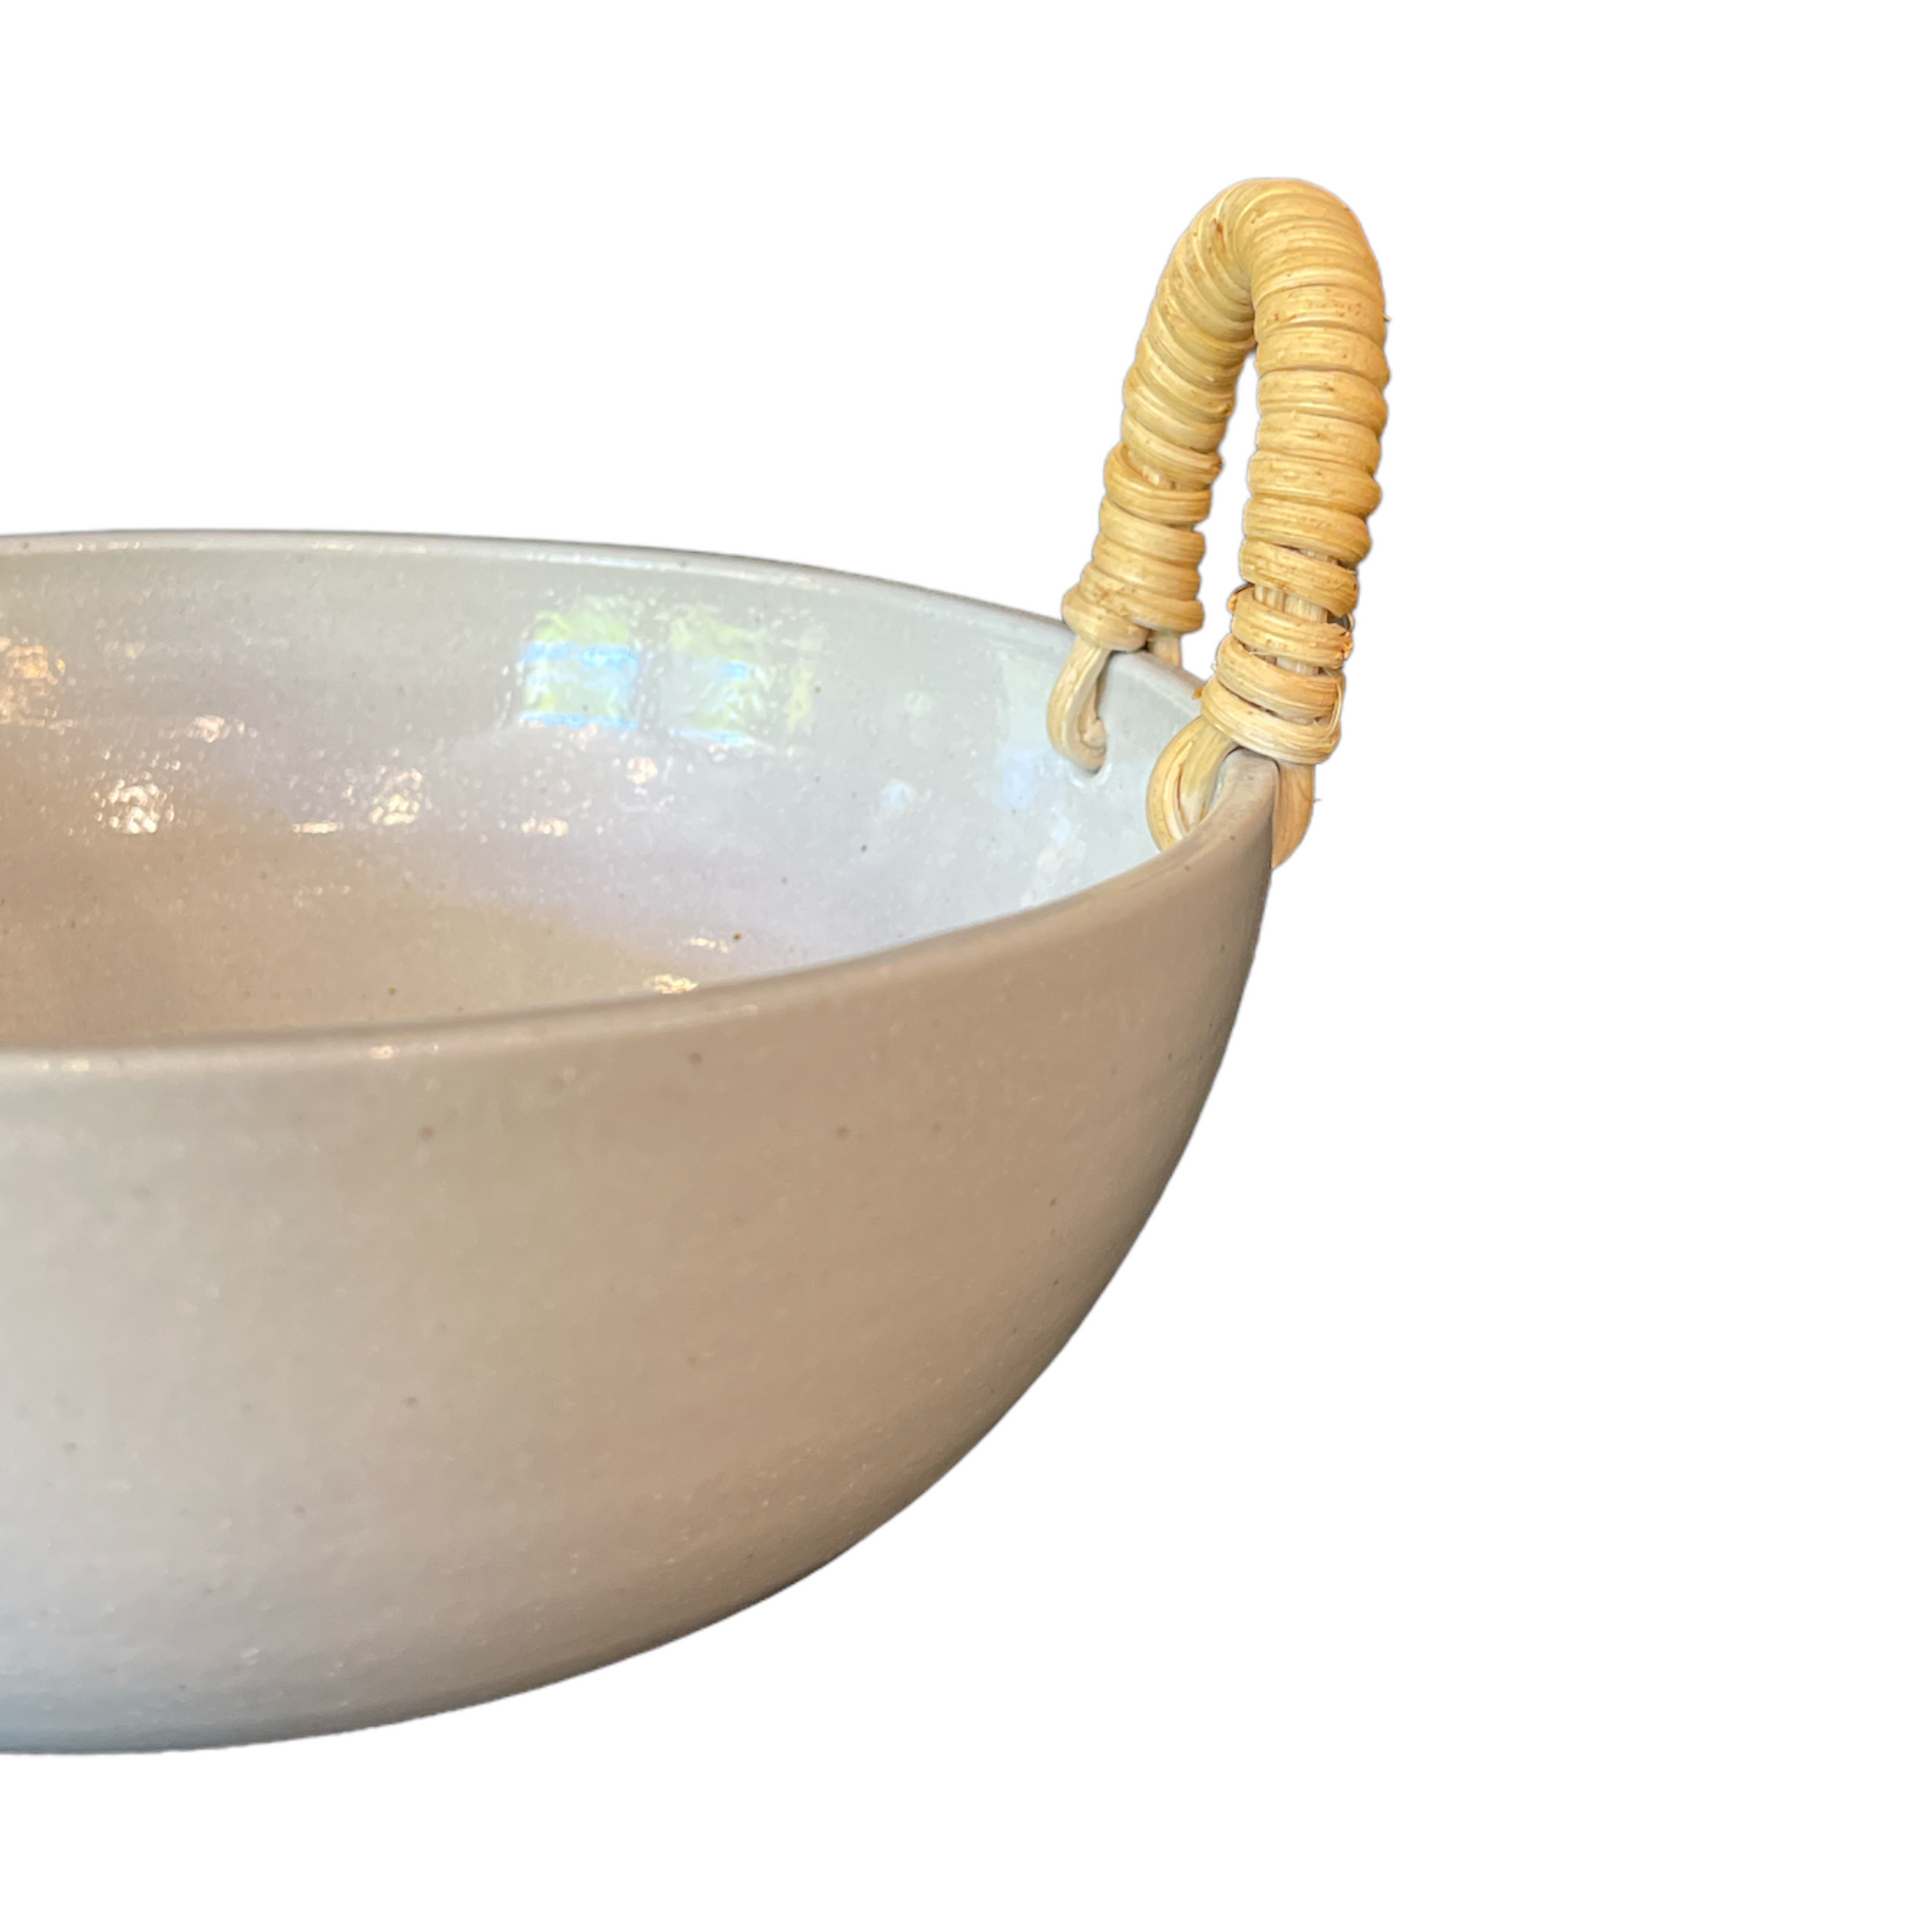 Our Rimbah Ceramic &amp; Rattan Bowl is a beautifully handmade, tactile piece, with qualities that are evident in its organic shape and distinctive glazed finish. The subtle cream stoneware accented by Rattan handles brings a stylish aesthetic to your table.